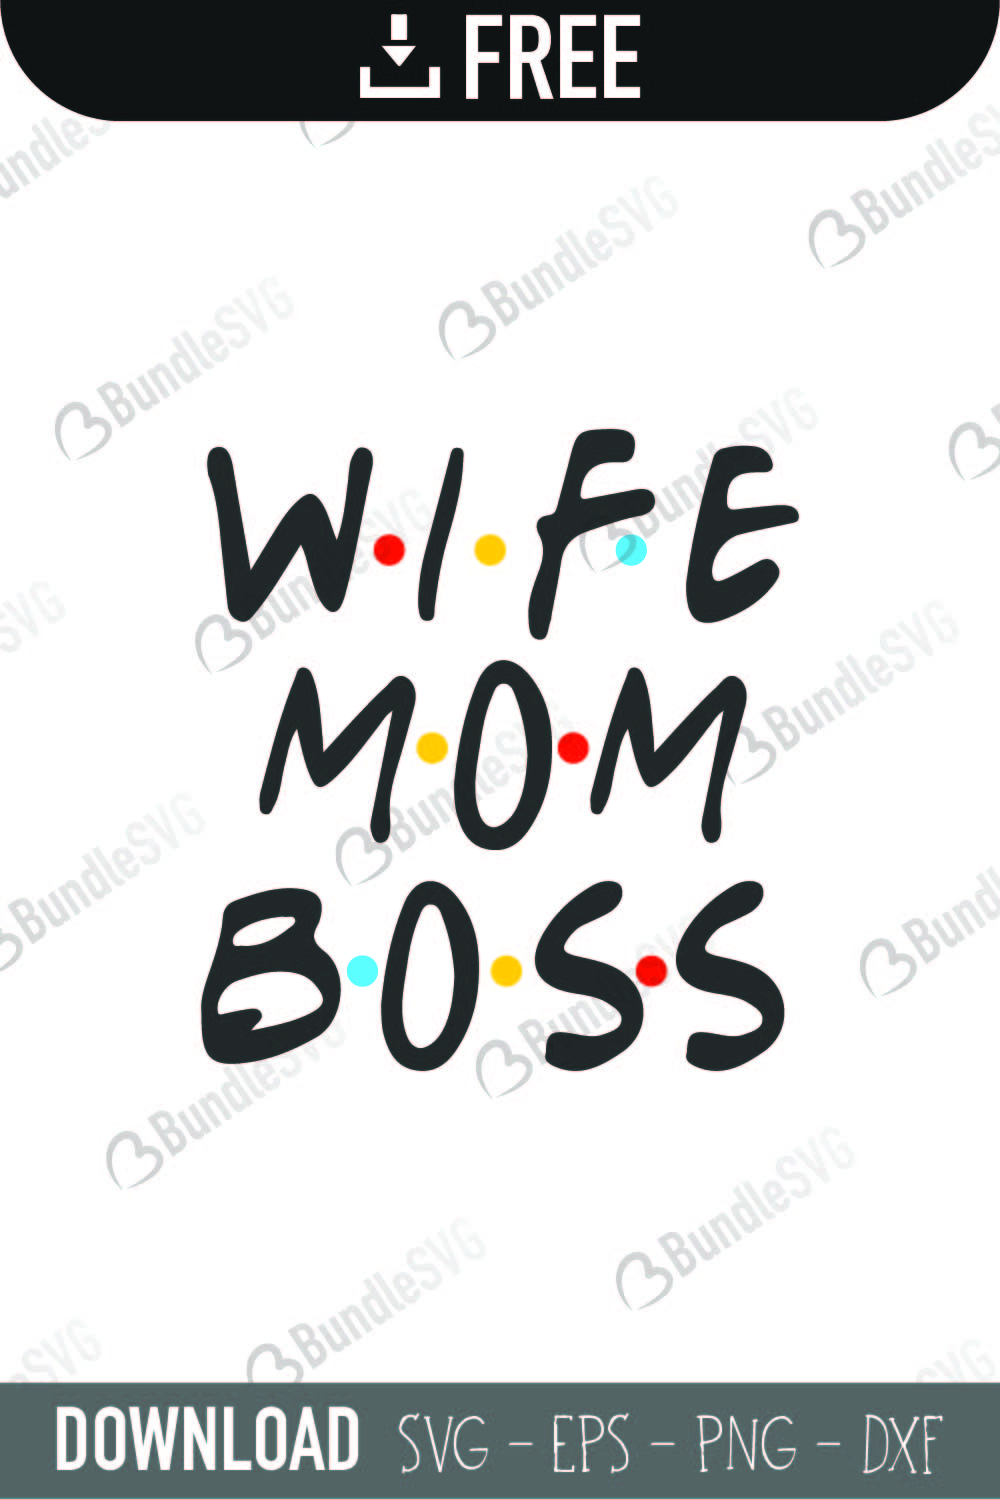 Download Mom Life Svg Wife Svg Dxf Wife Mom Boss Svg Mother Svg Mother S Day Svg Mama Bear Svg Png Mom Svg For Cricut And Silhouette Clip Art Art Collectibles Deshpandefoundationindia Org